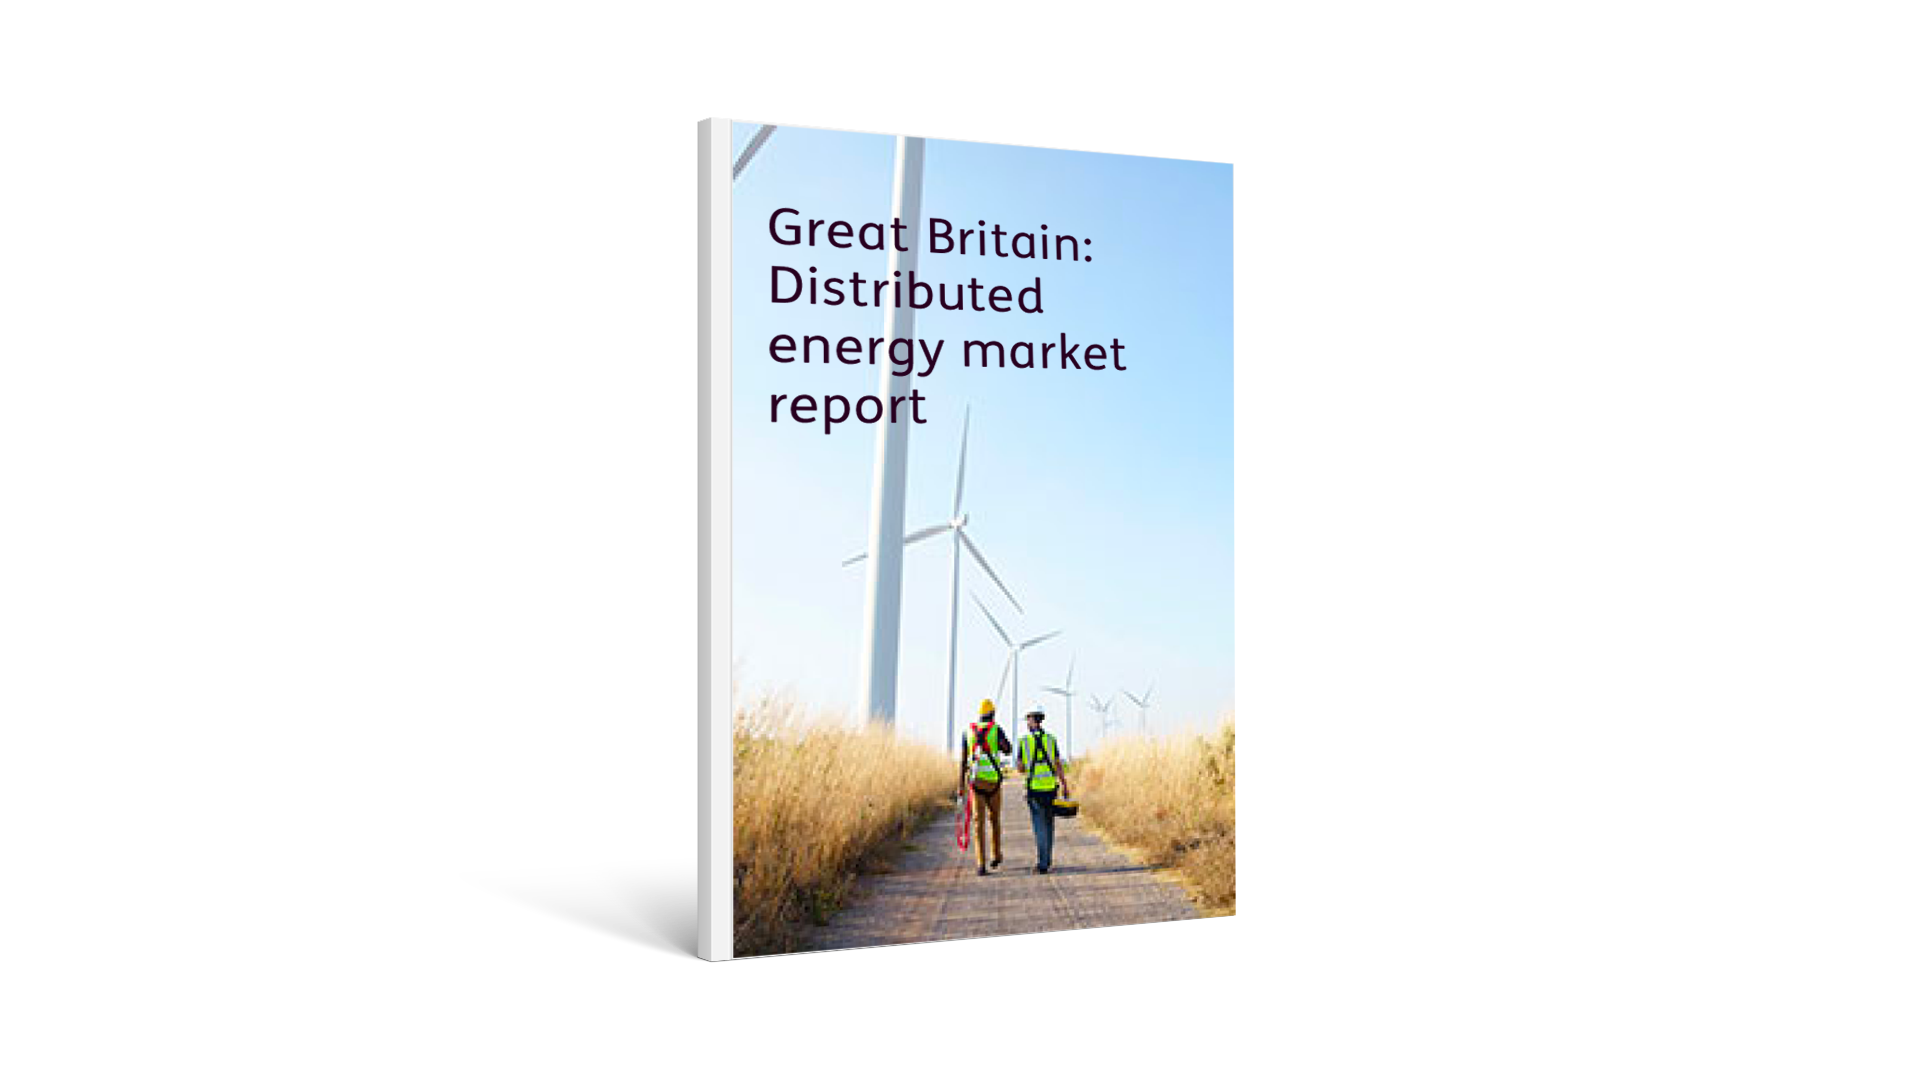 Great Britain: Distributed energy market report